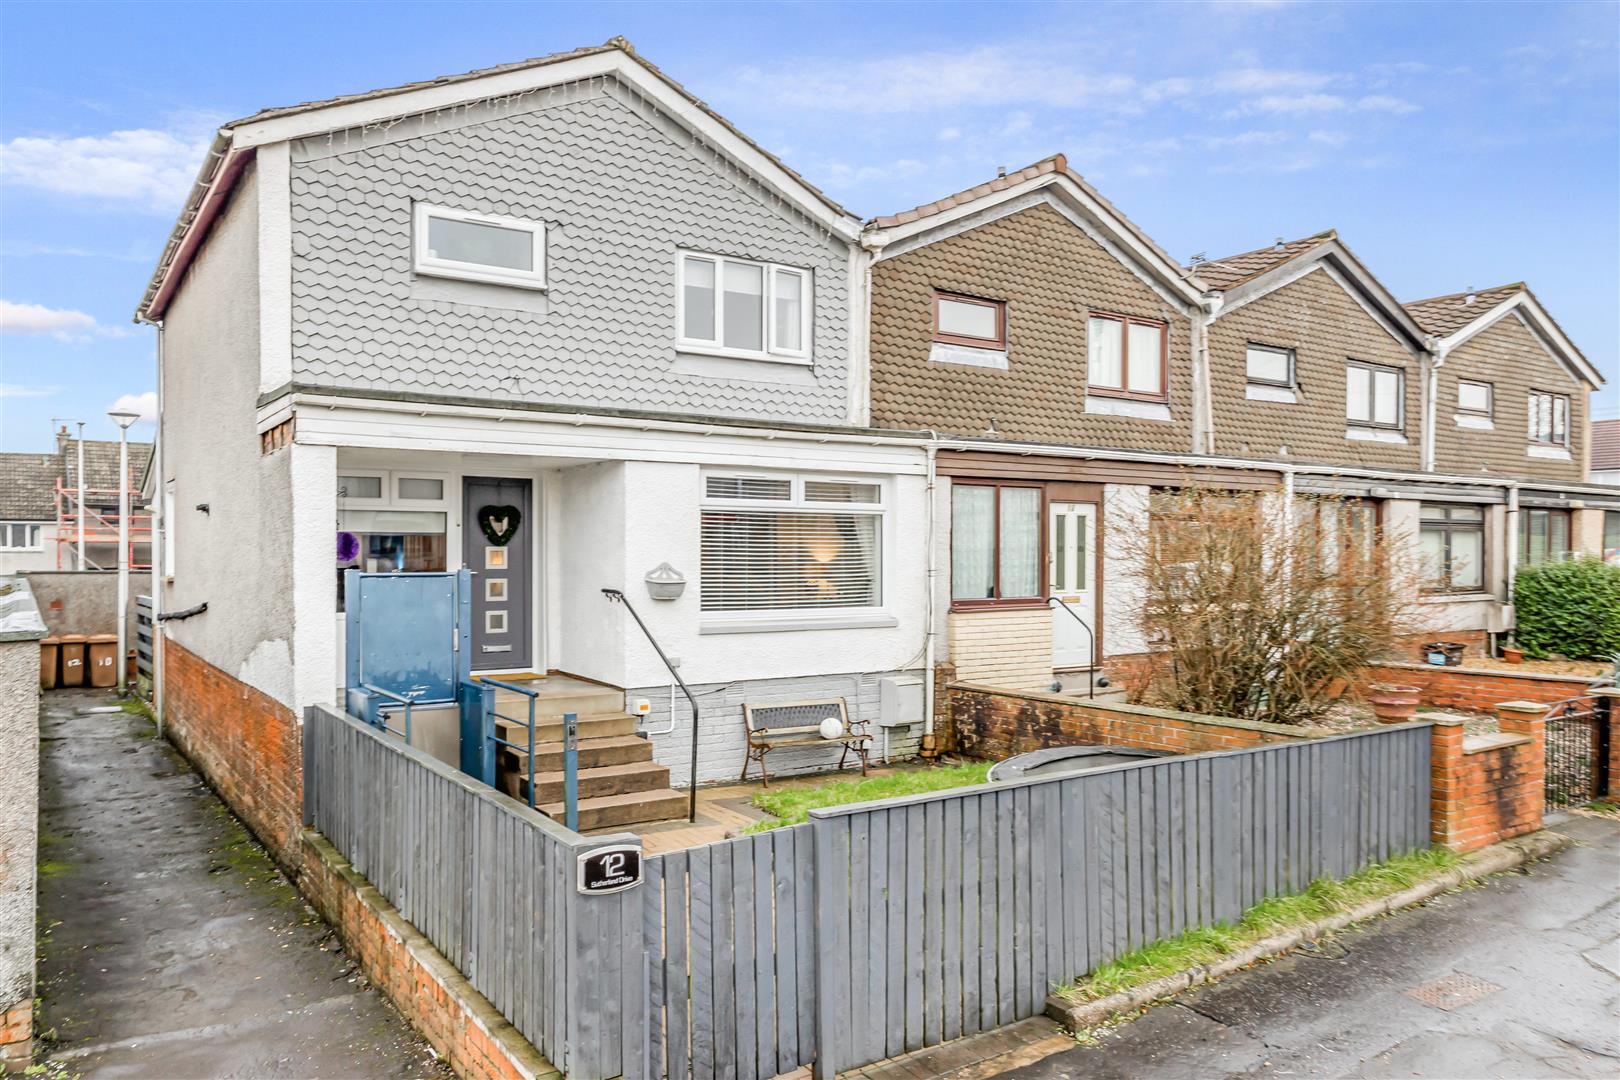 4 bed end of terrace house for sale in Sutherland Drive, Denny, FK6 